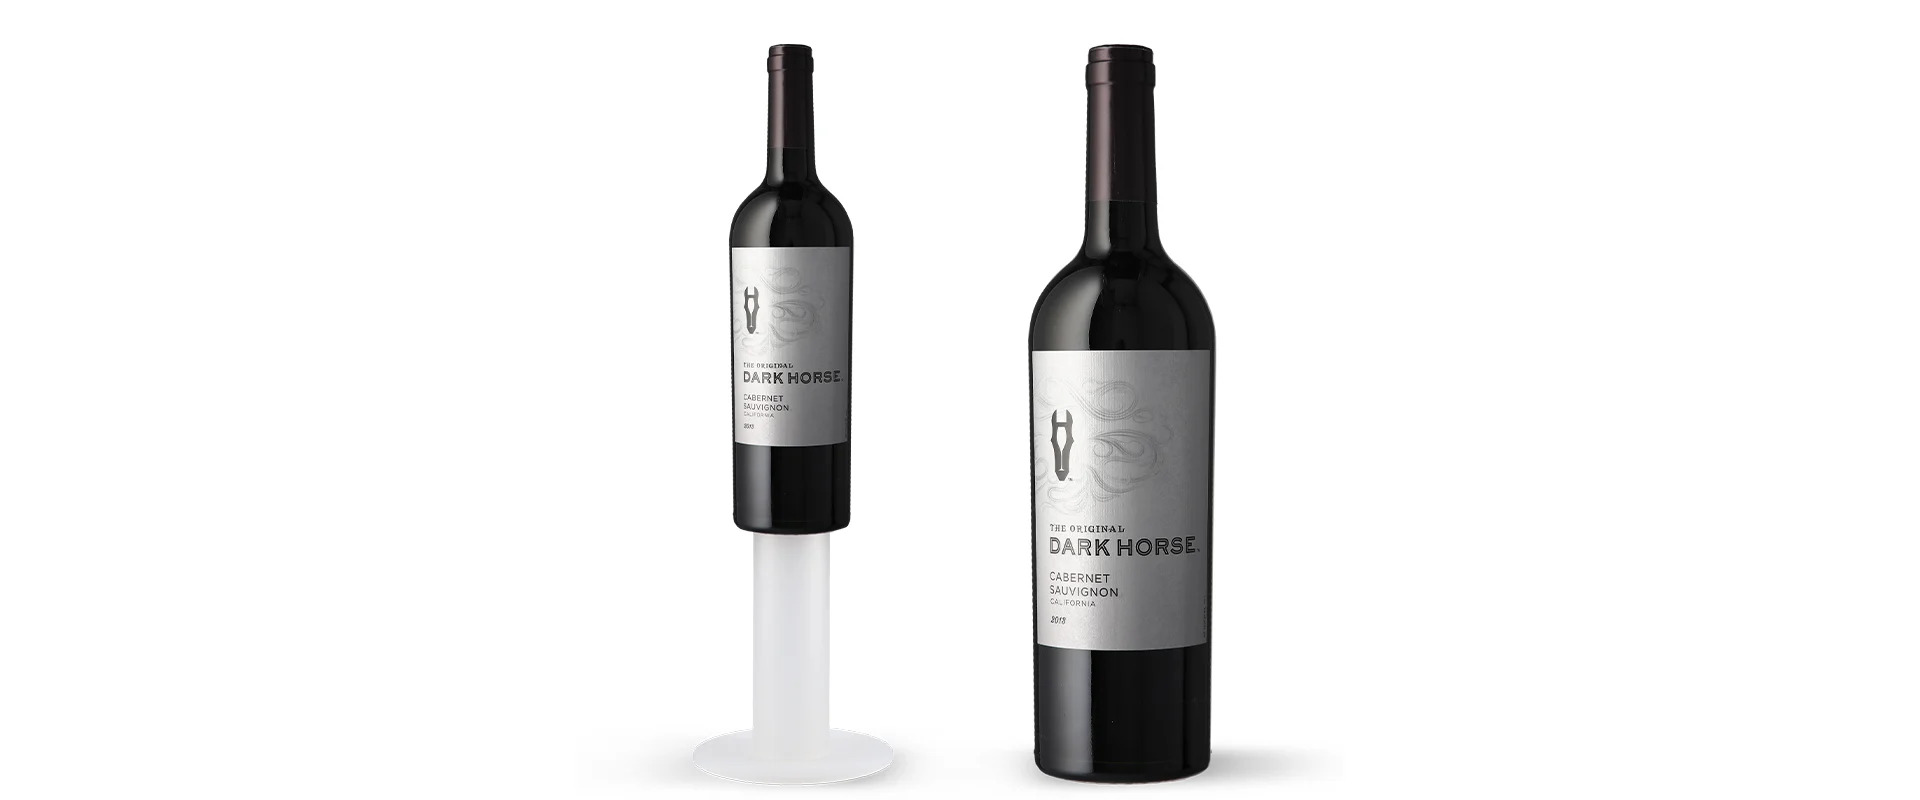 Product photography of wine bottles